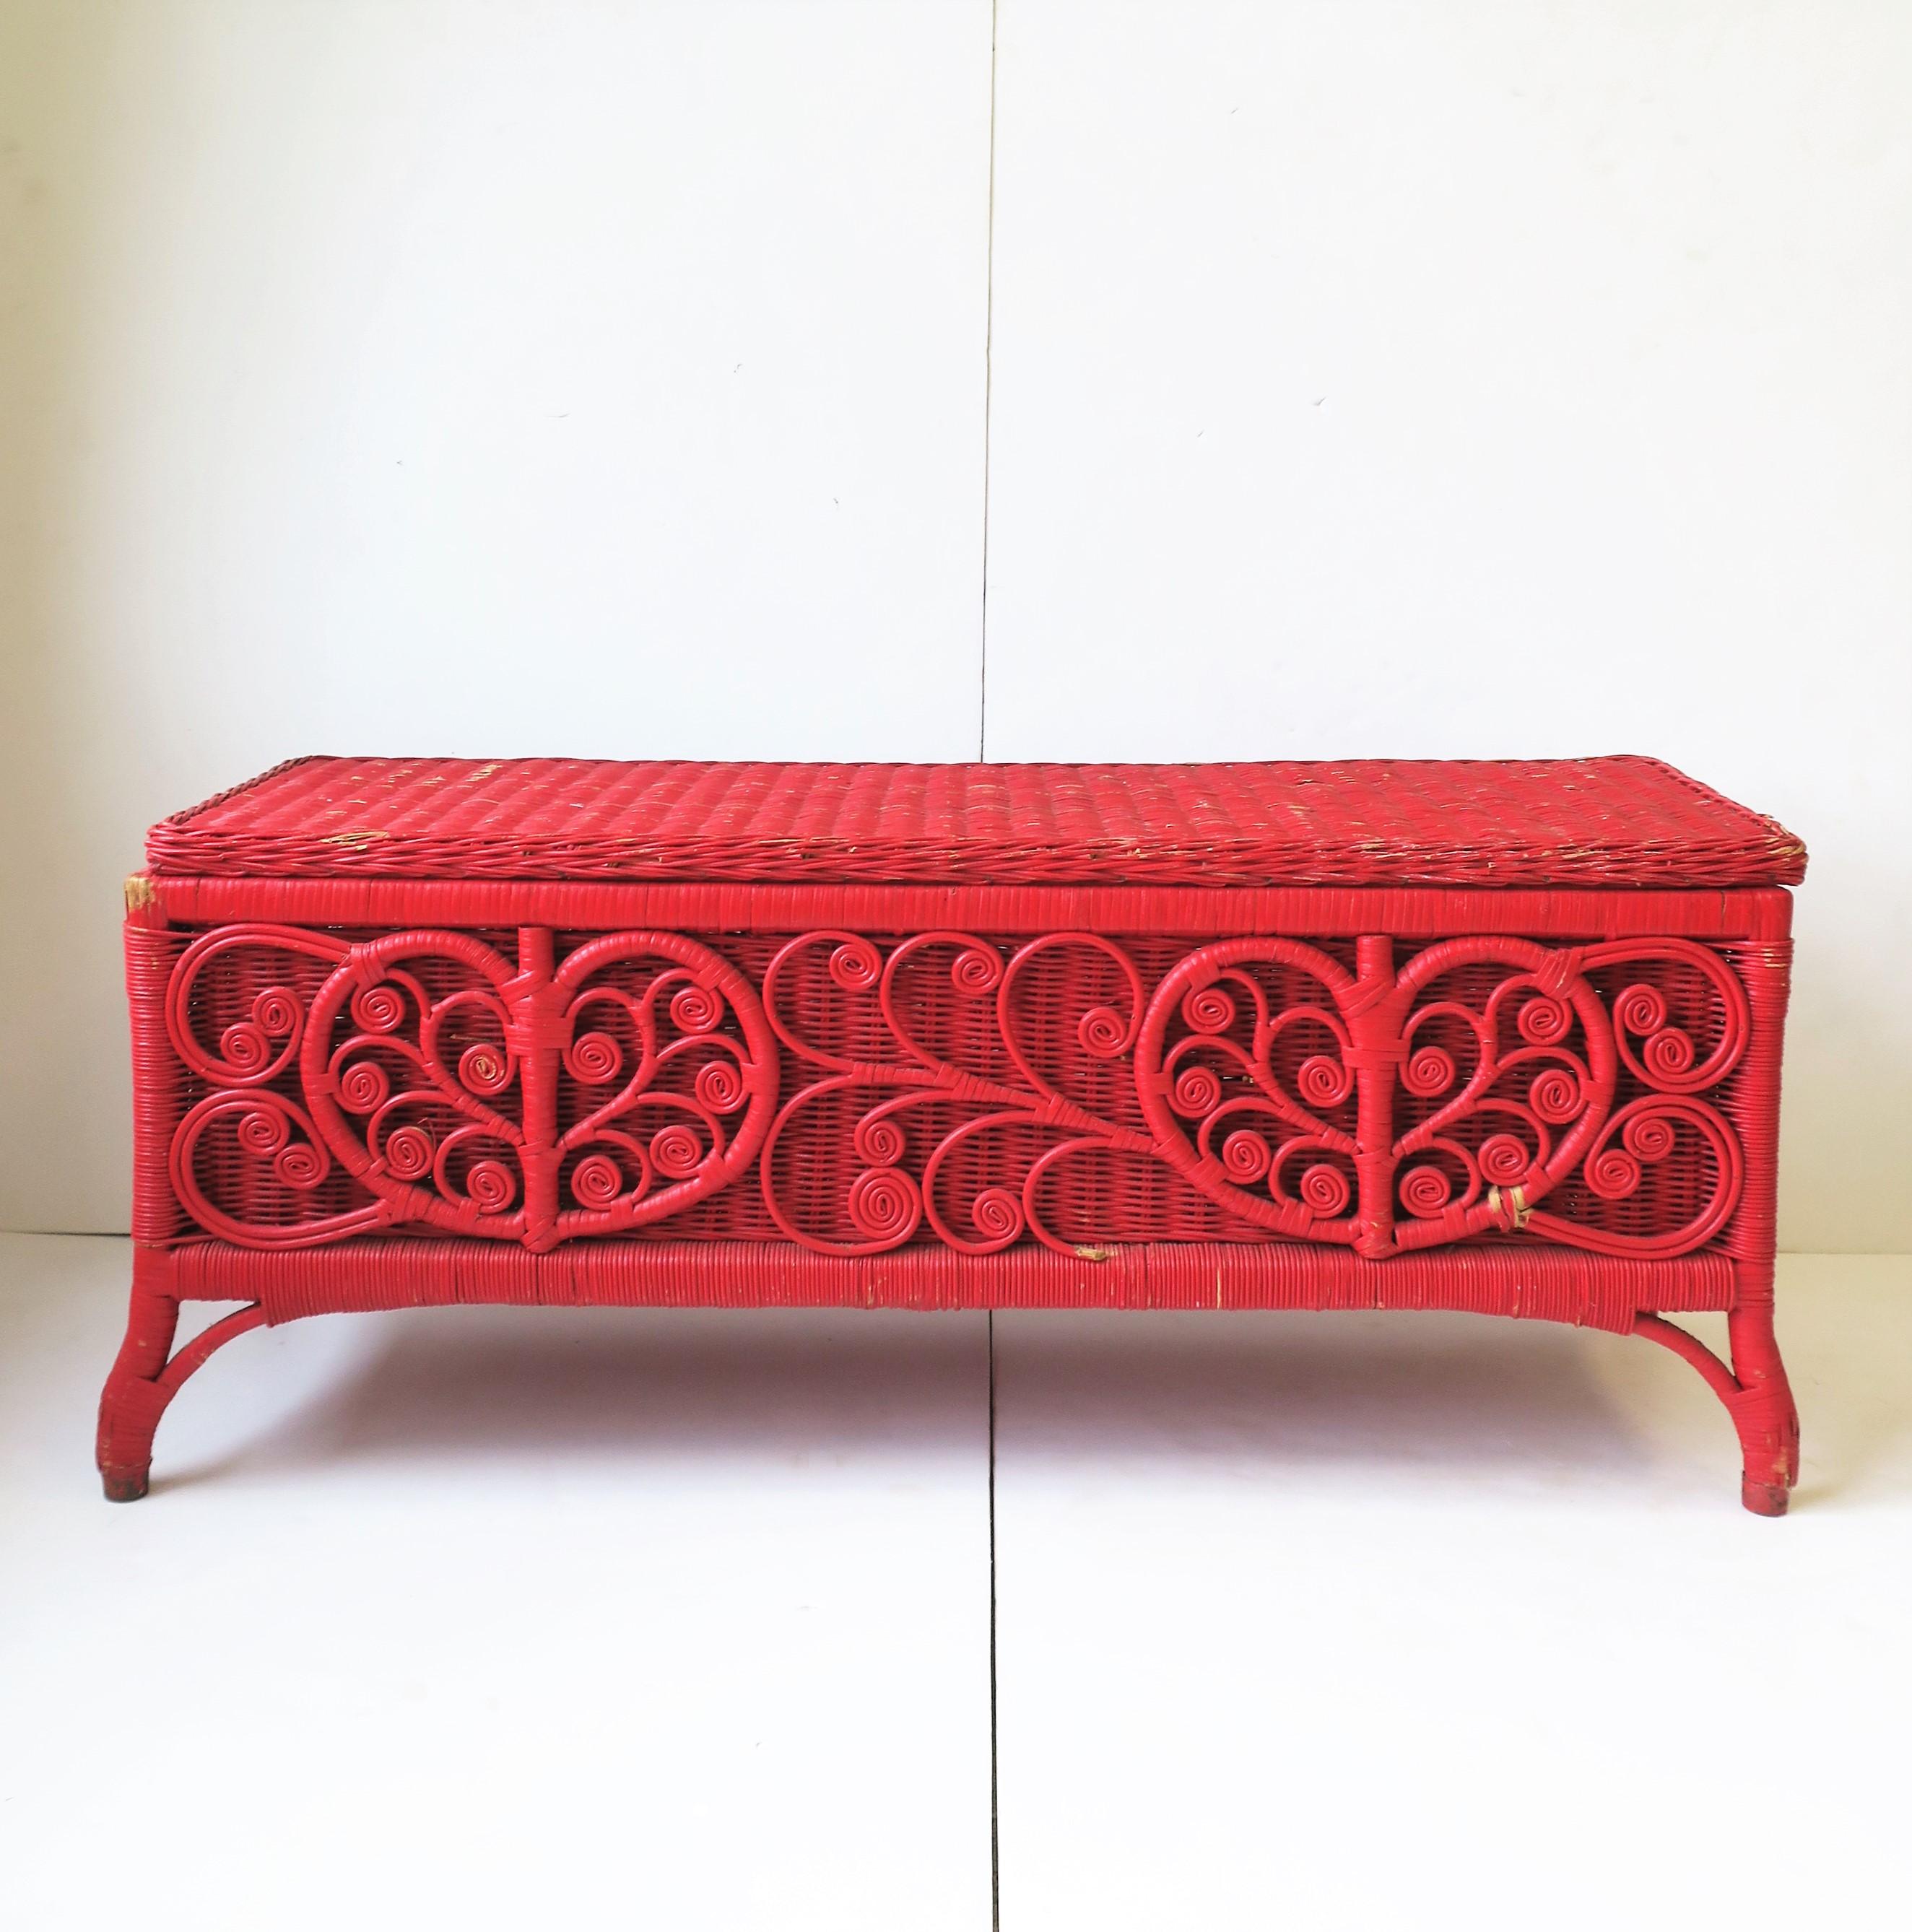 A vintage red painted wicker rattan bench with storage, circa early 20th century, USA. Piece could also double as a coffee or cocktail table. Dimensions: 40.75